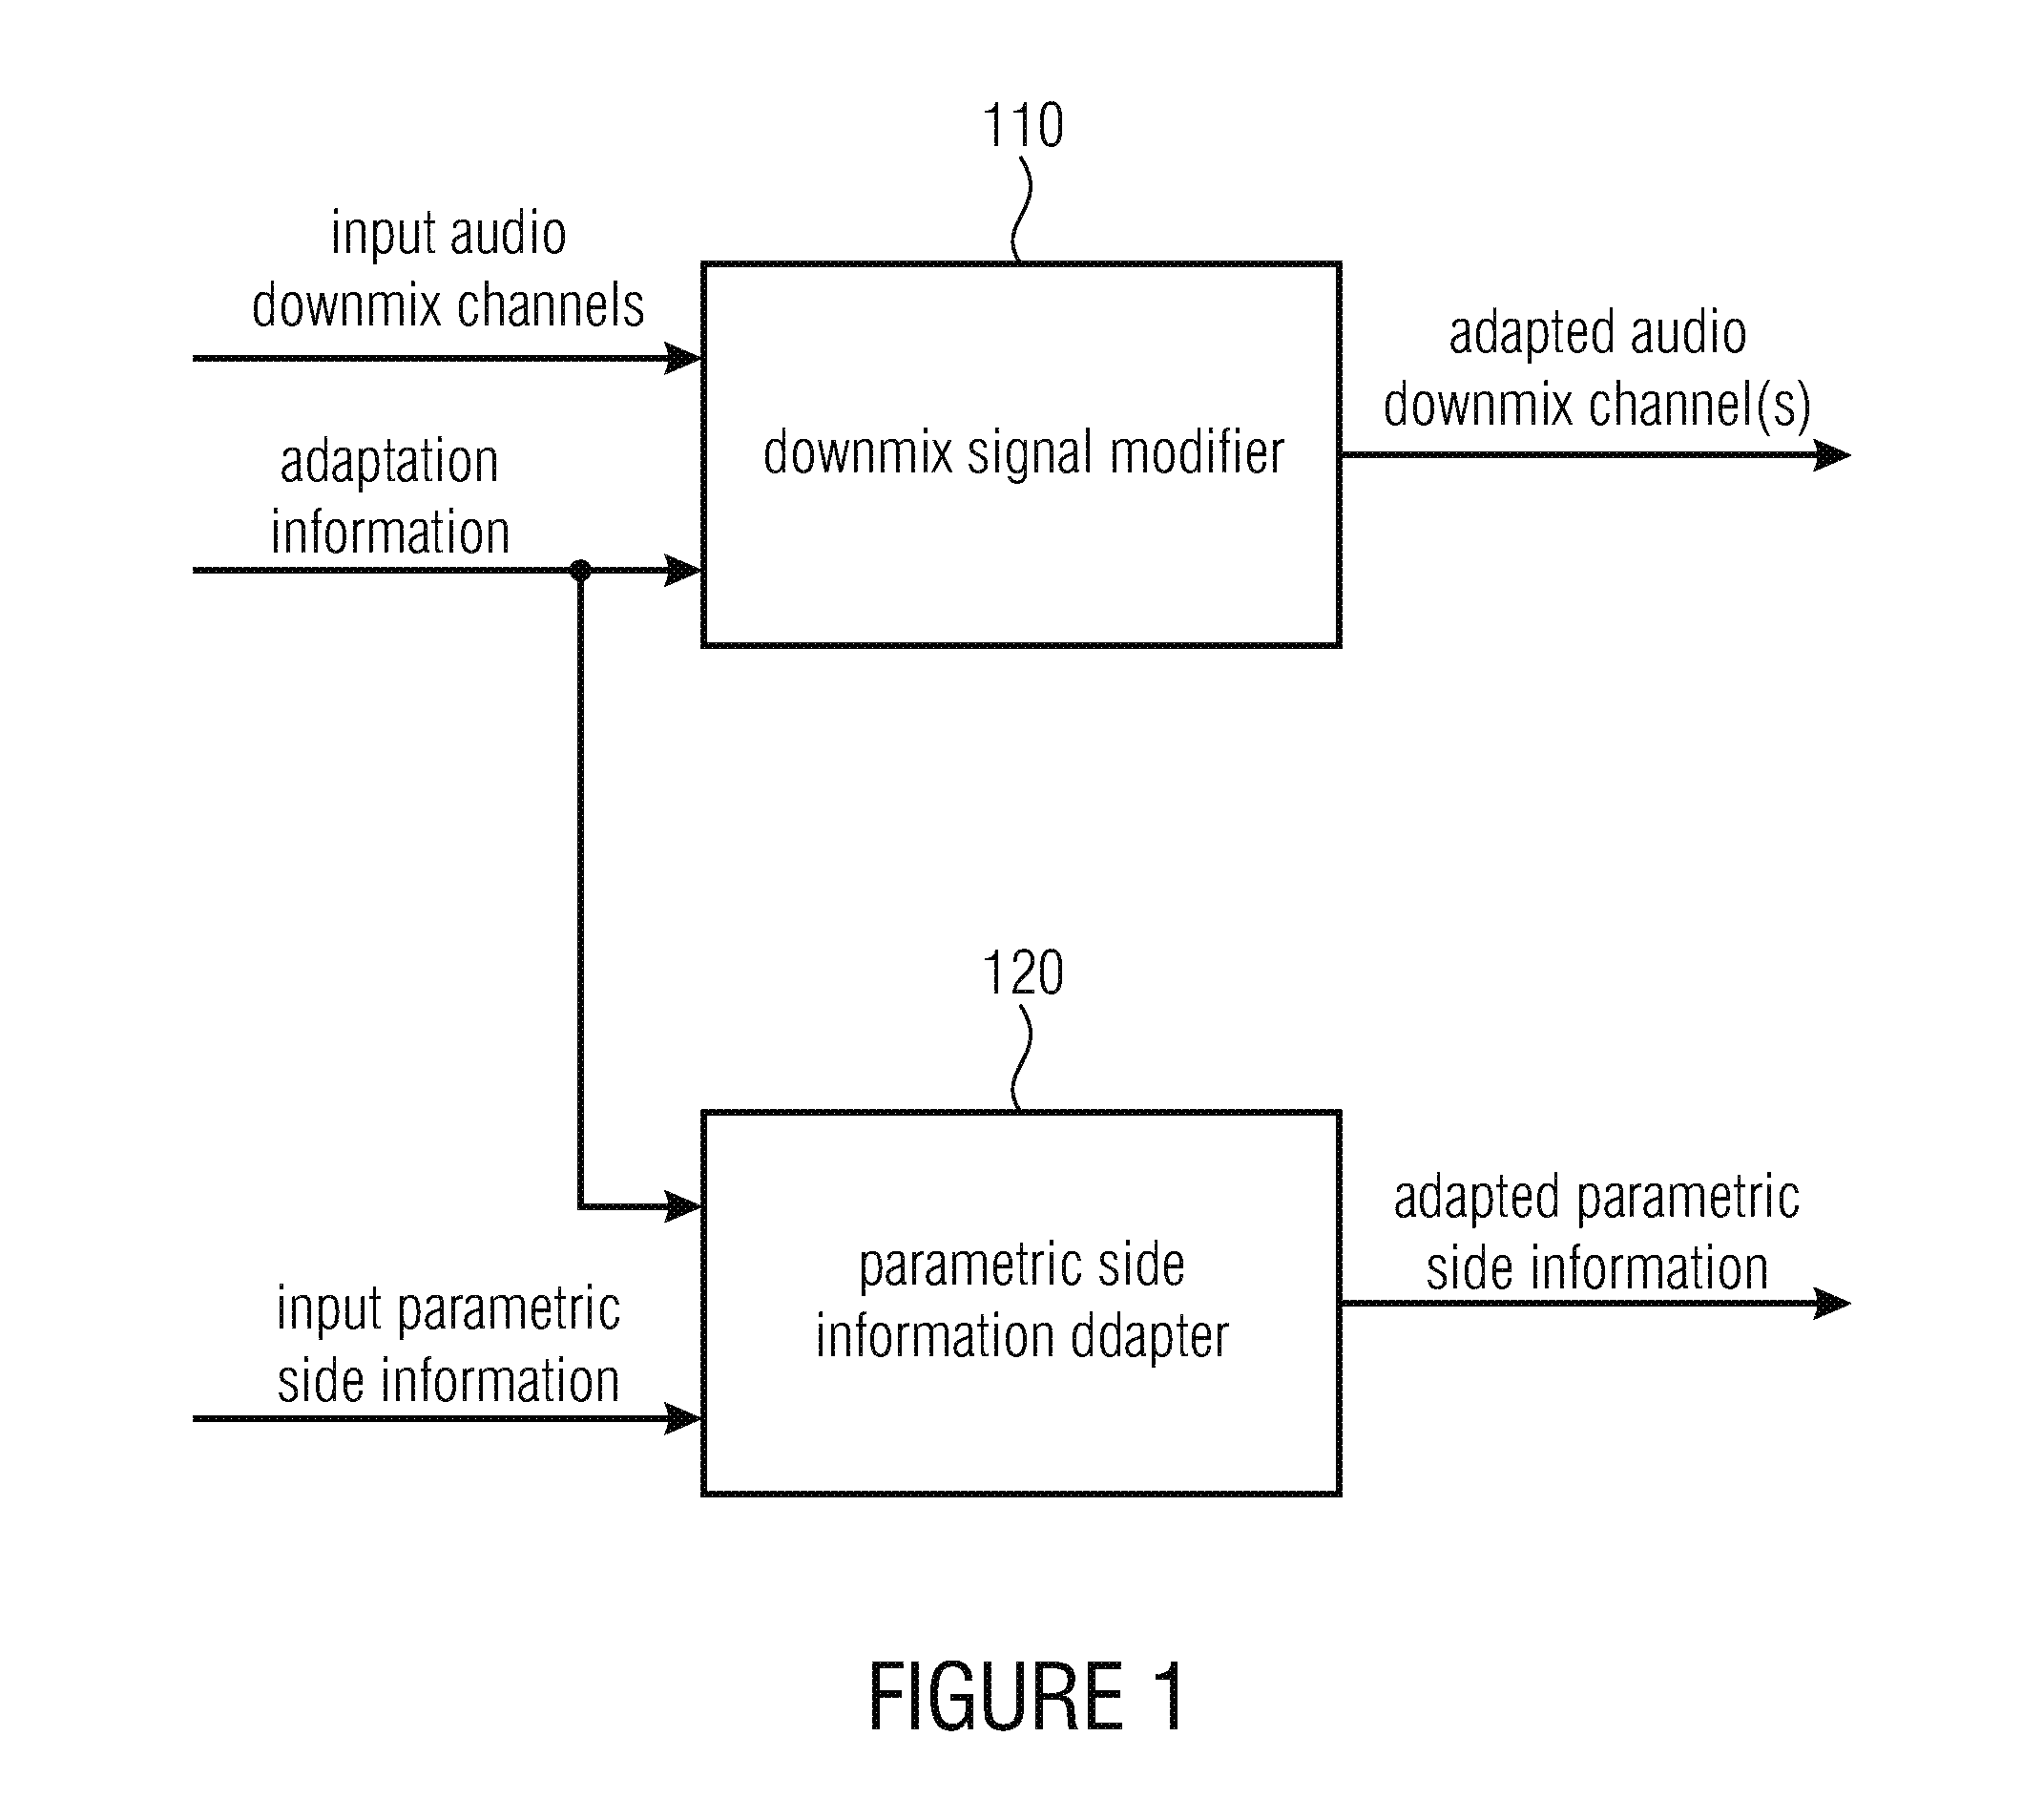 Apparatus and methods for adapting audio information in spatial audio object coding